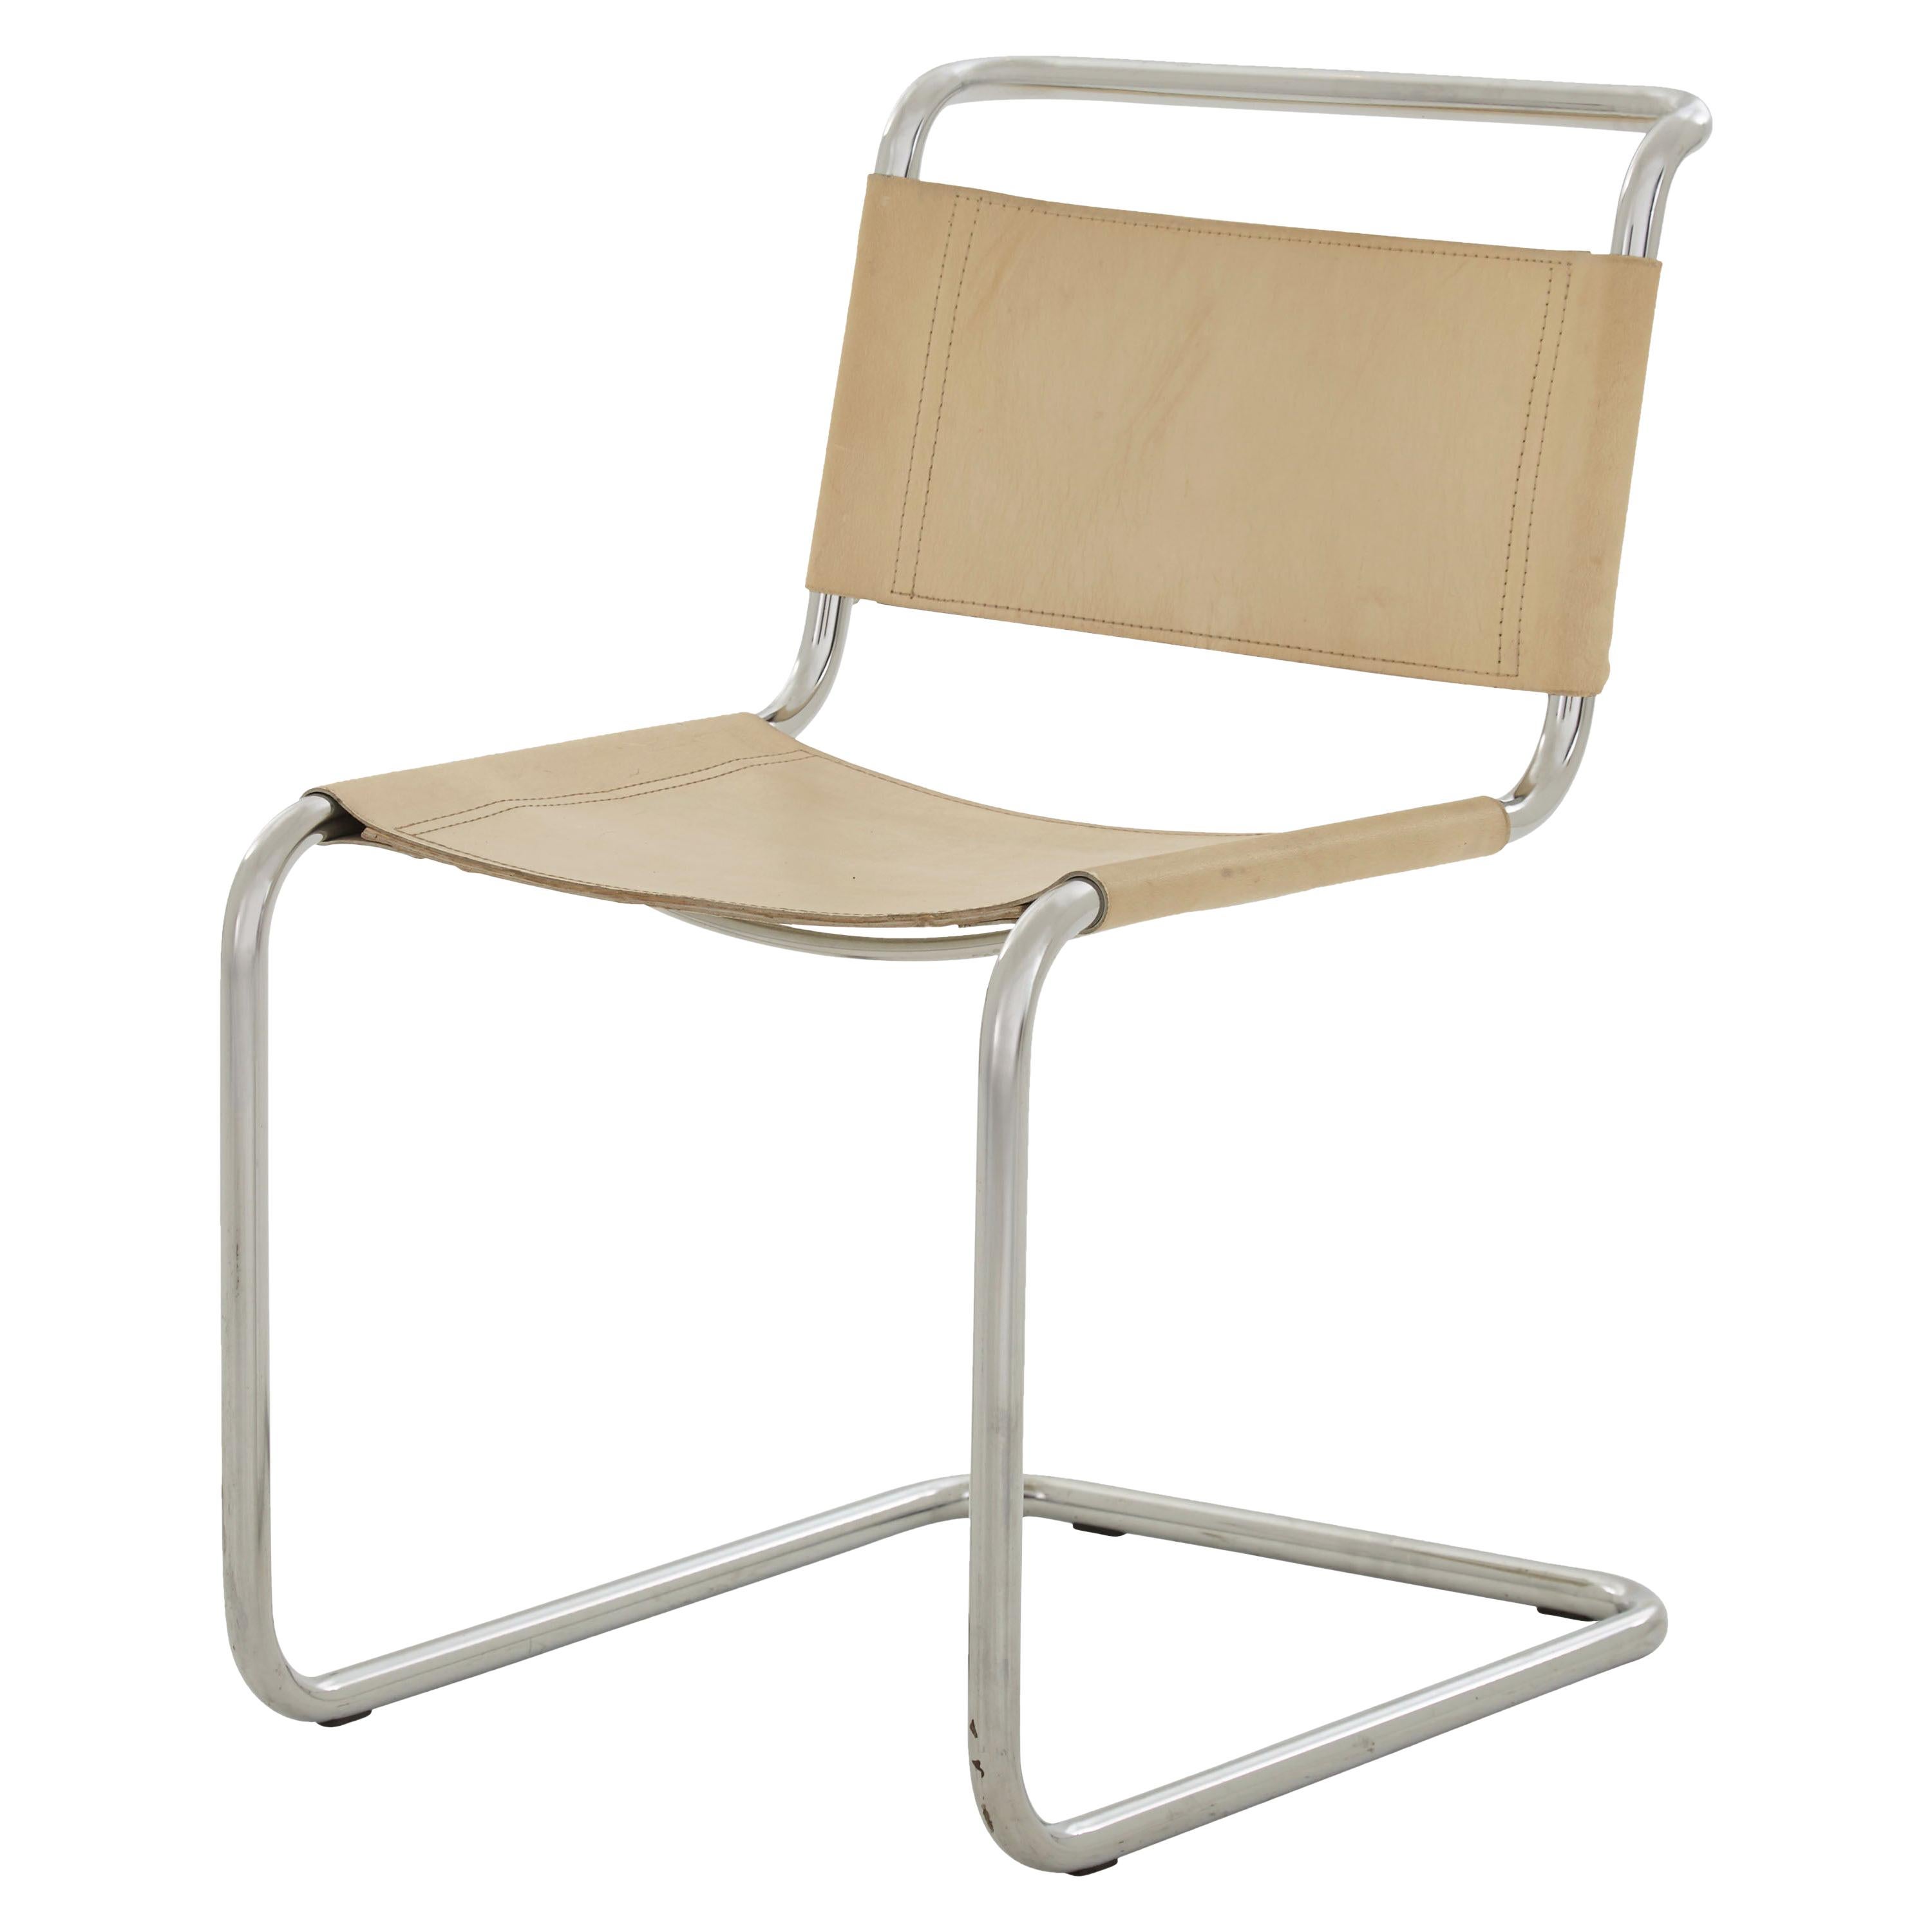 Cream Leather and Chrome Cantilever Chair